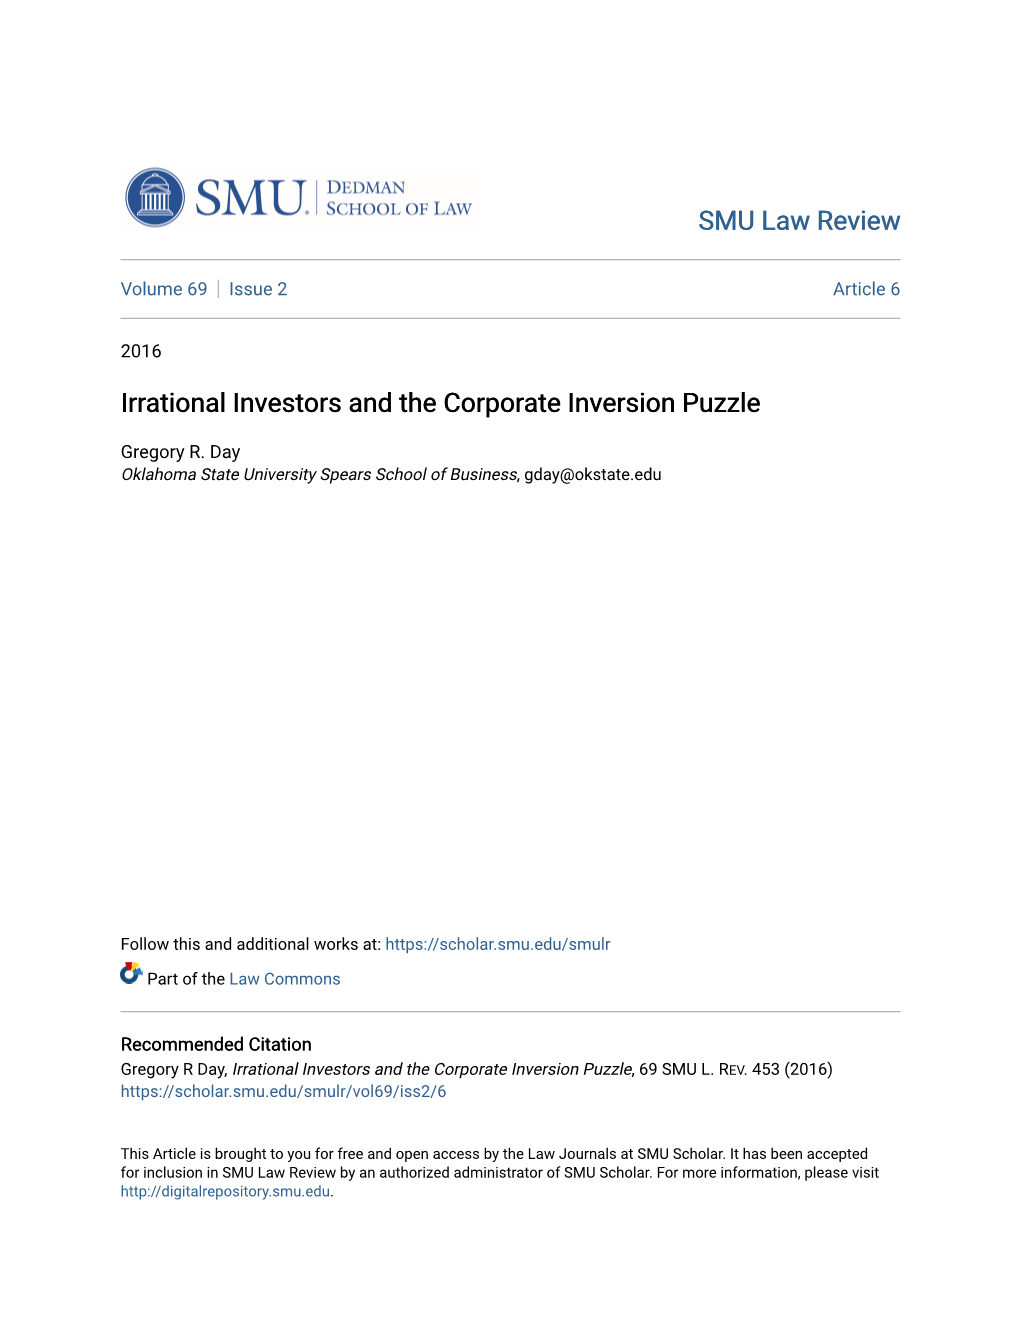 Irrational Investors and the Corporate Inversion Puzzle